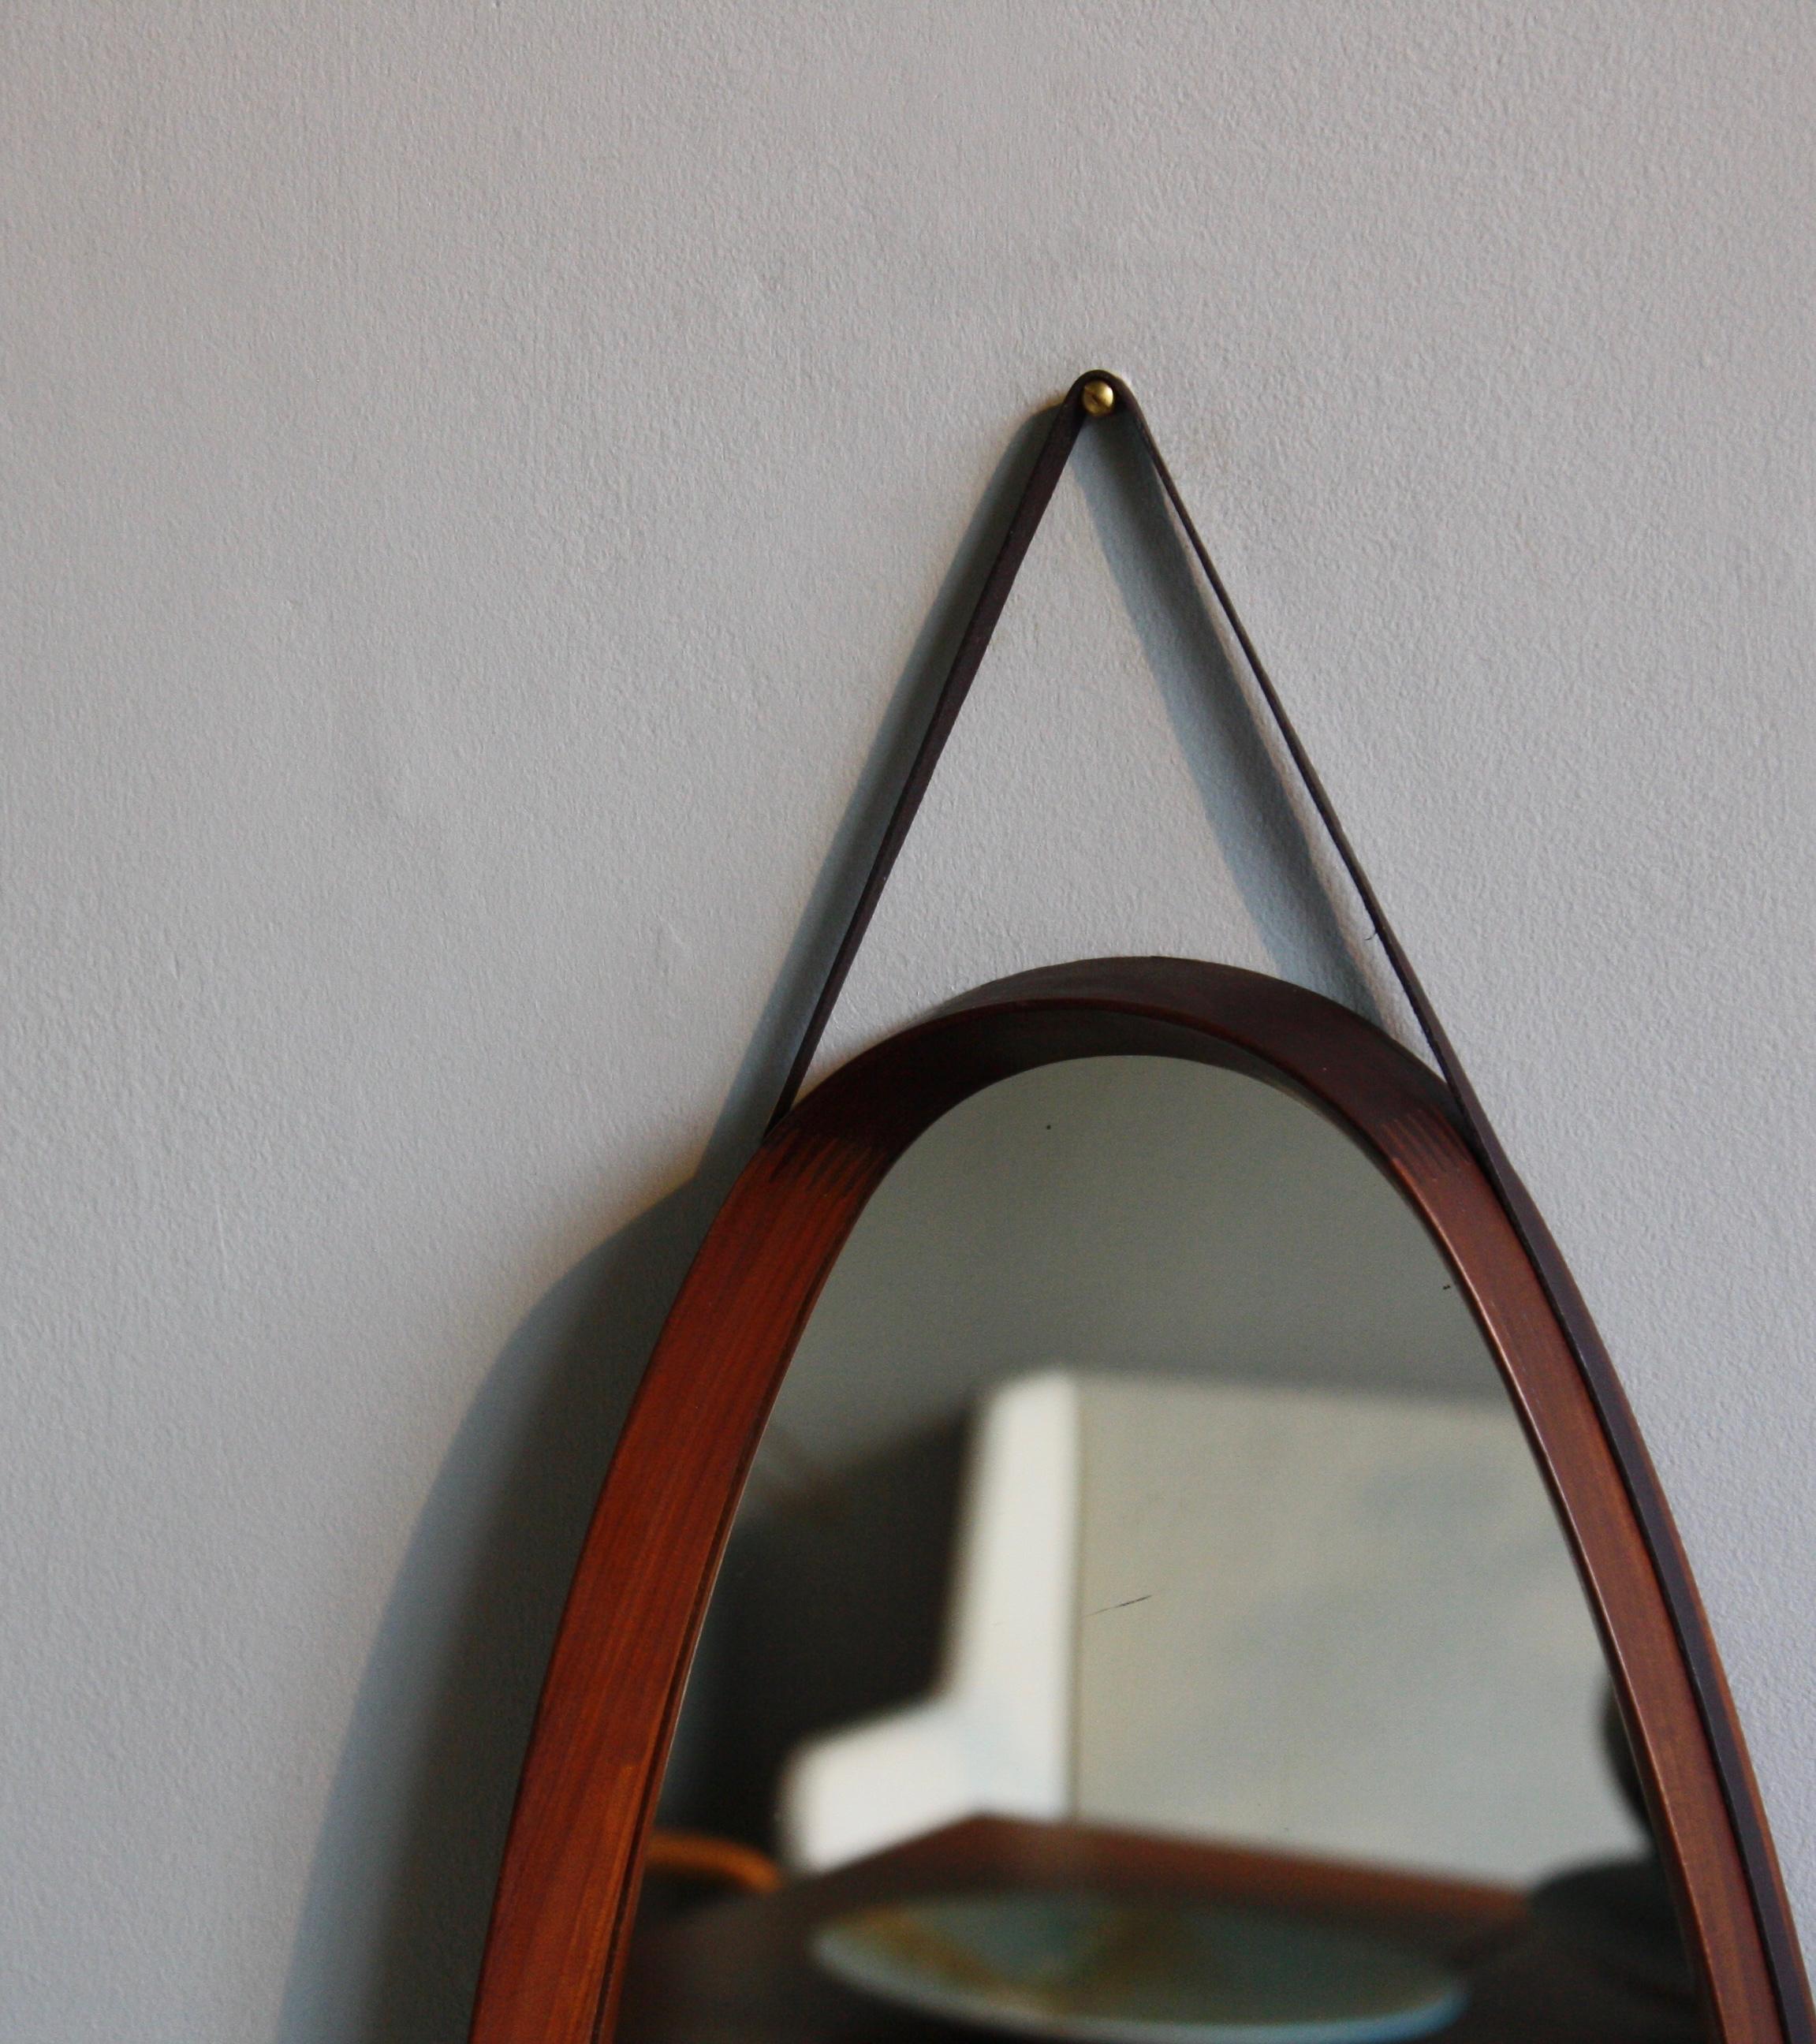 An oval shaped vintage wall mirror with leather hanging strap, made in Denmark, circa 1950. The mirror is made of sections of solid teak wood which are joined together using finger joints. This exposed construction, the tan colored leather strap and